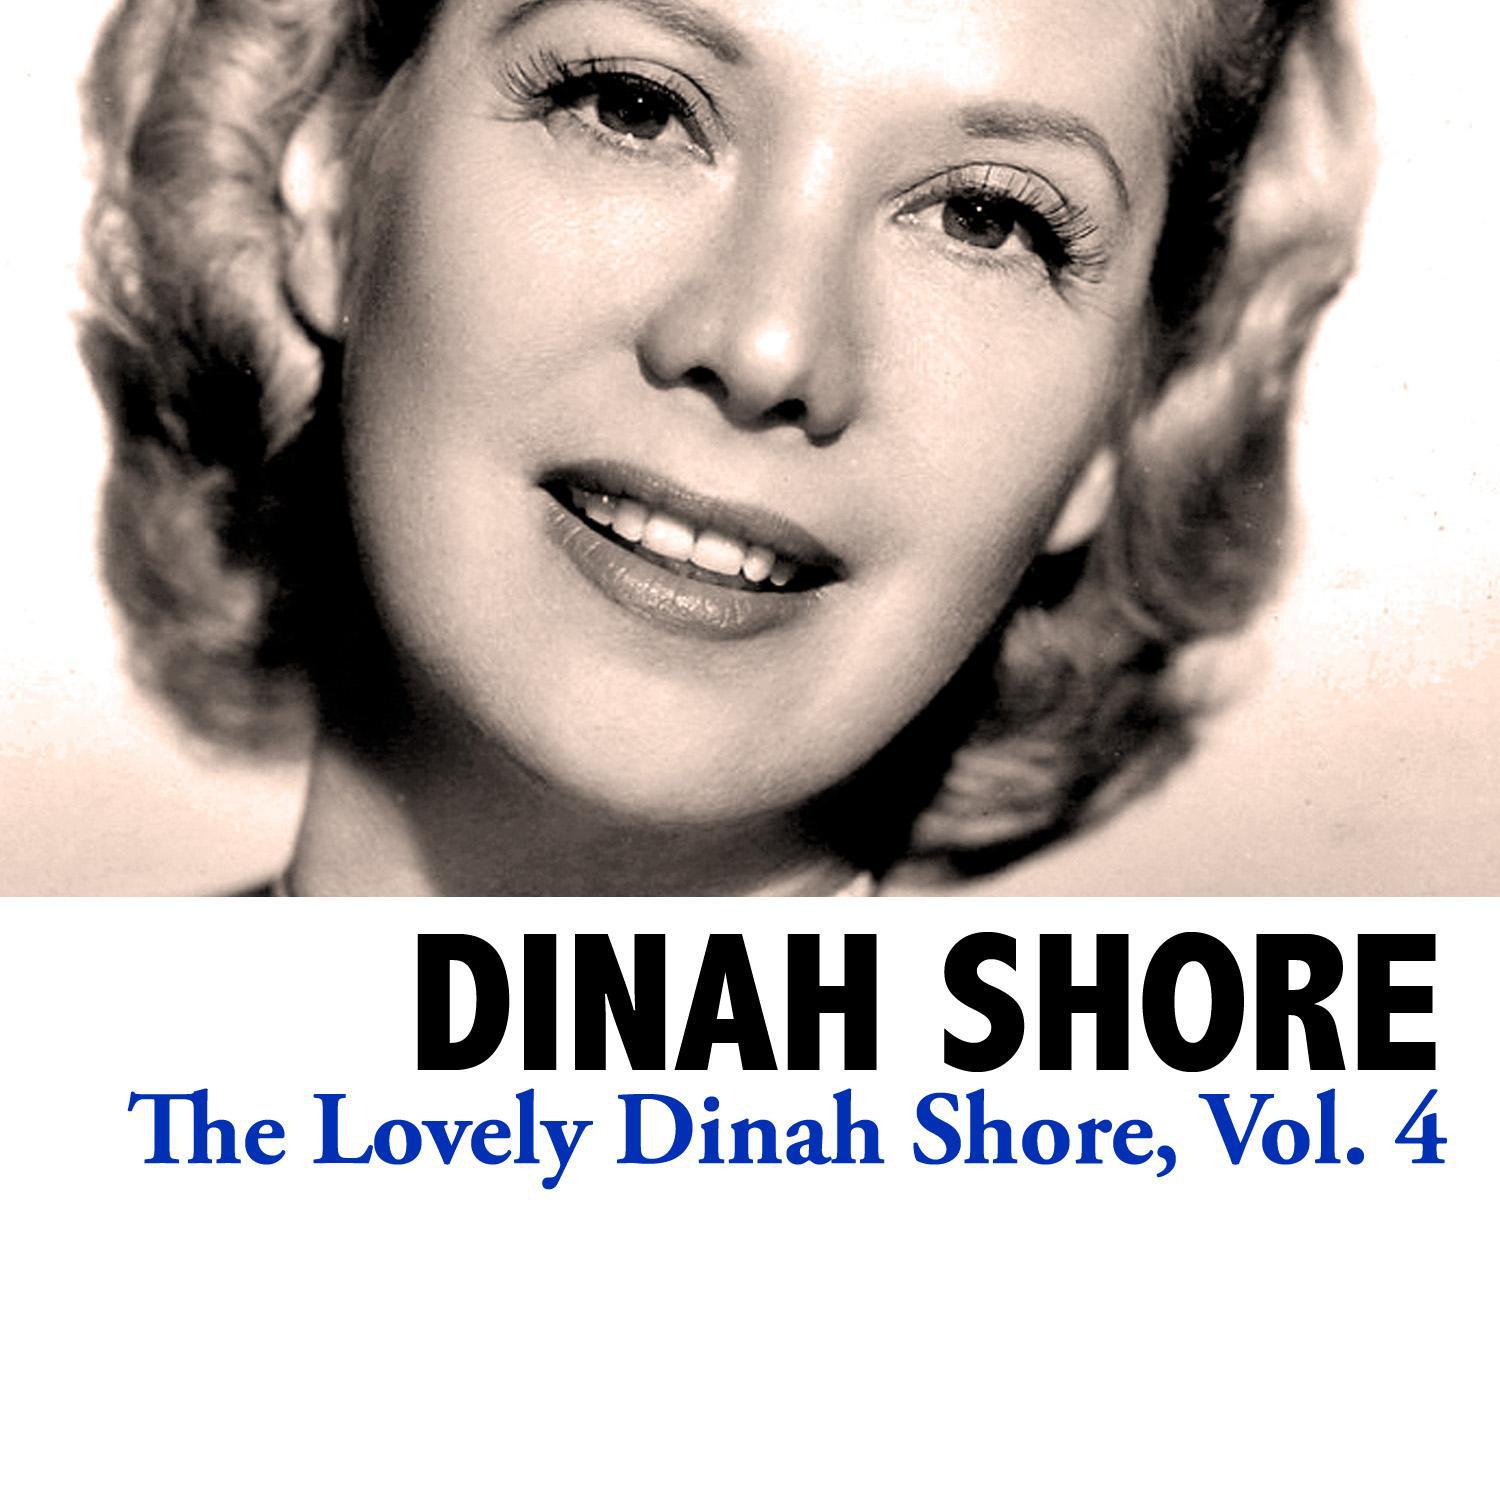 The Lovely Dinah Shore, Vol. 4专辑